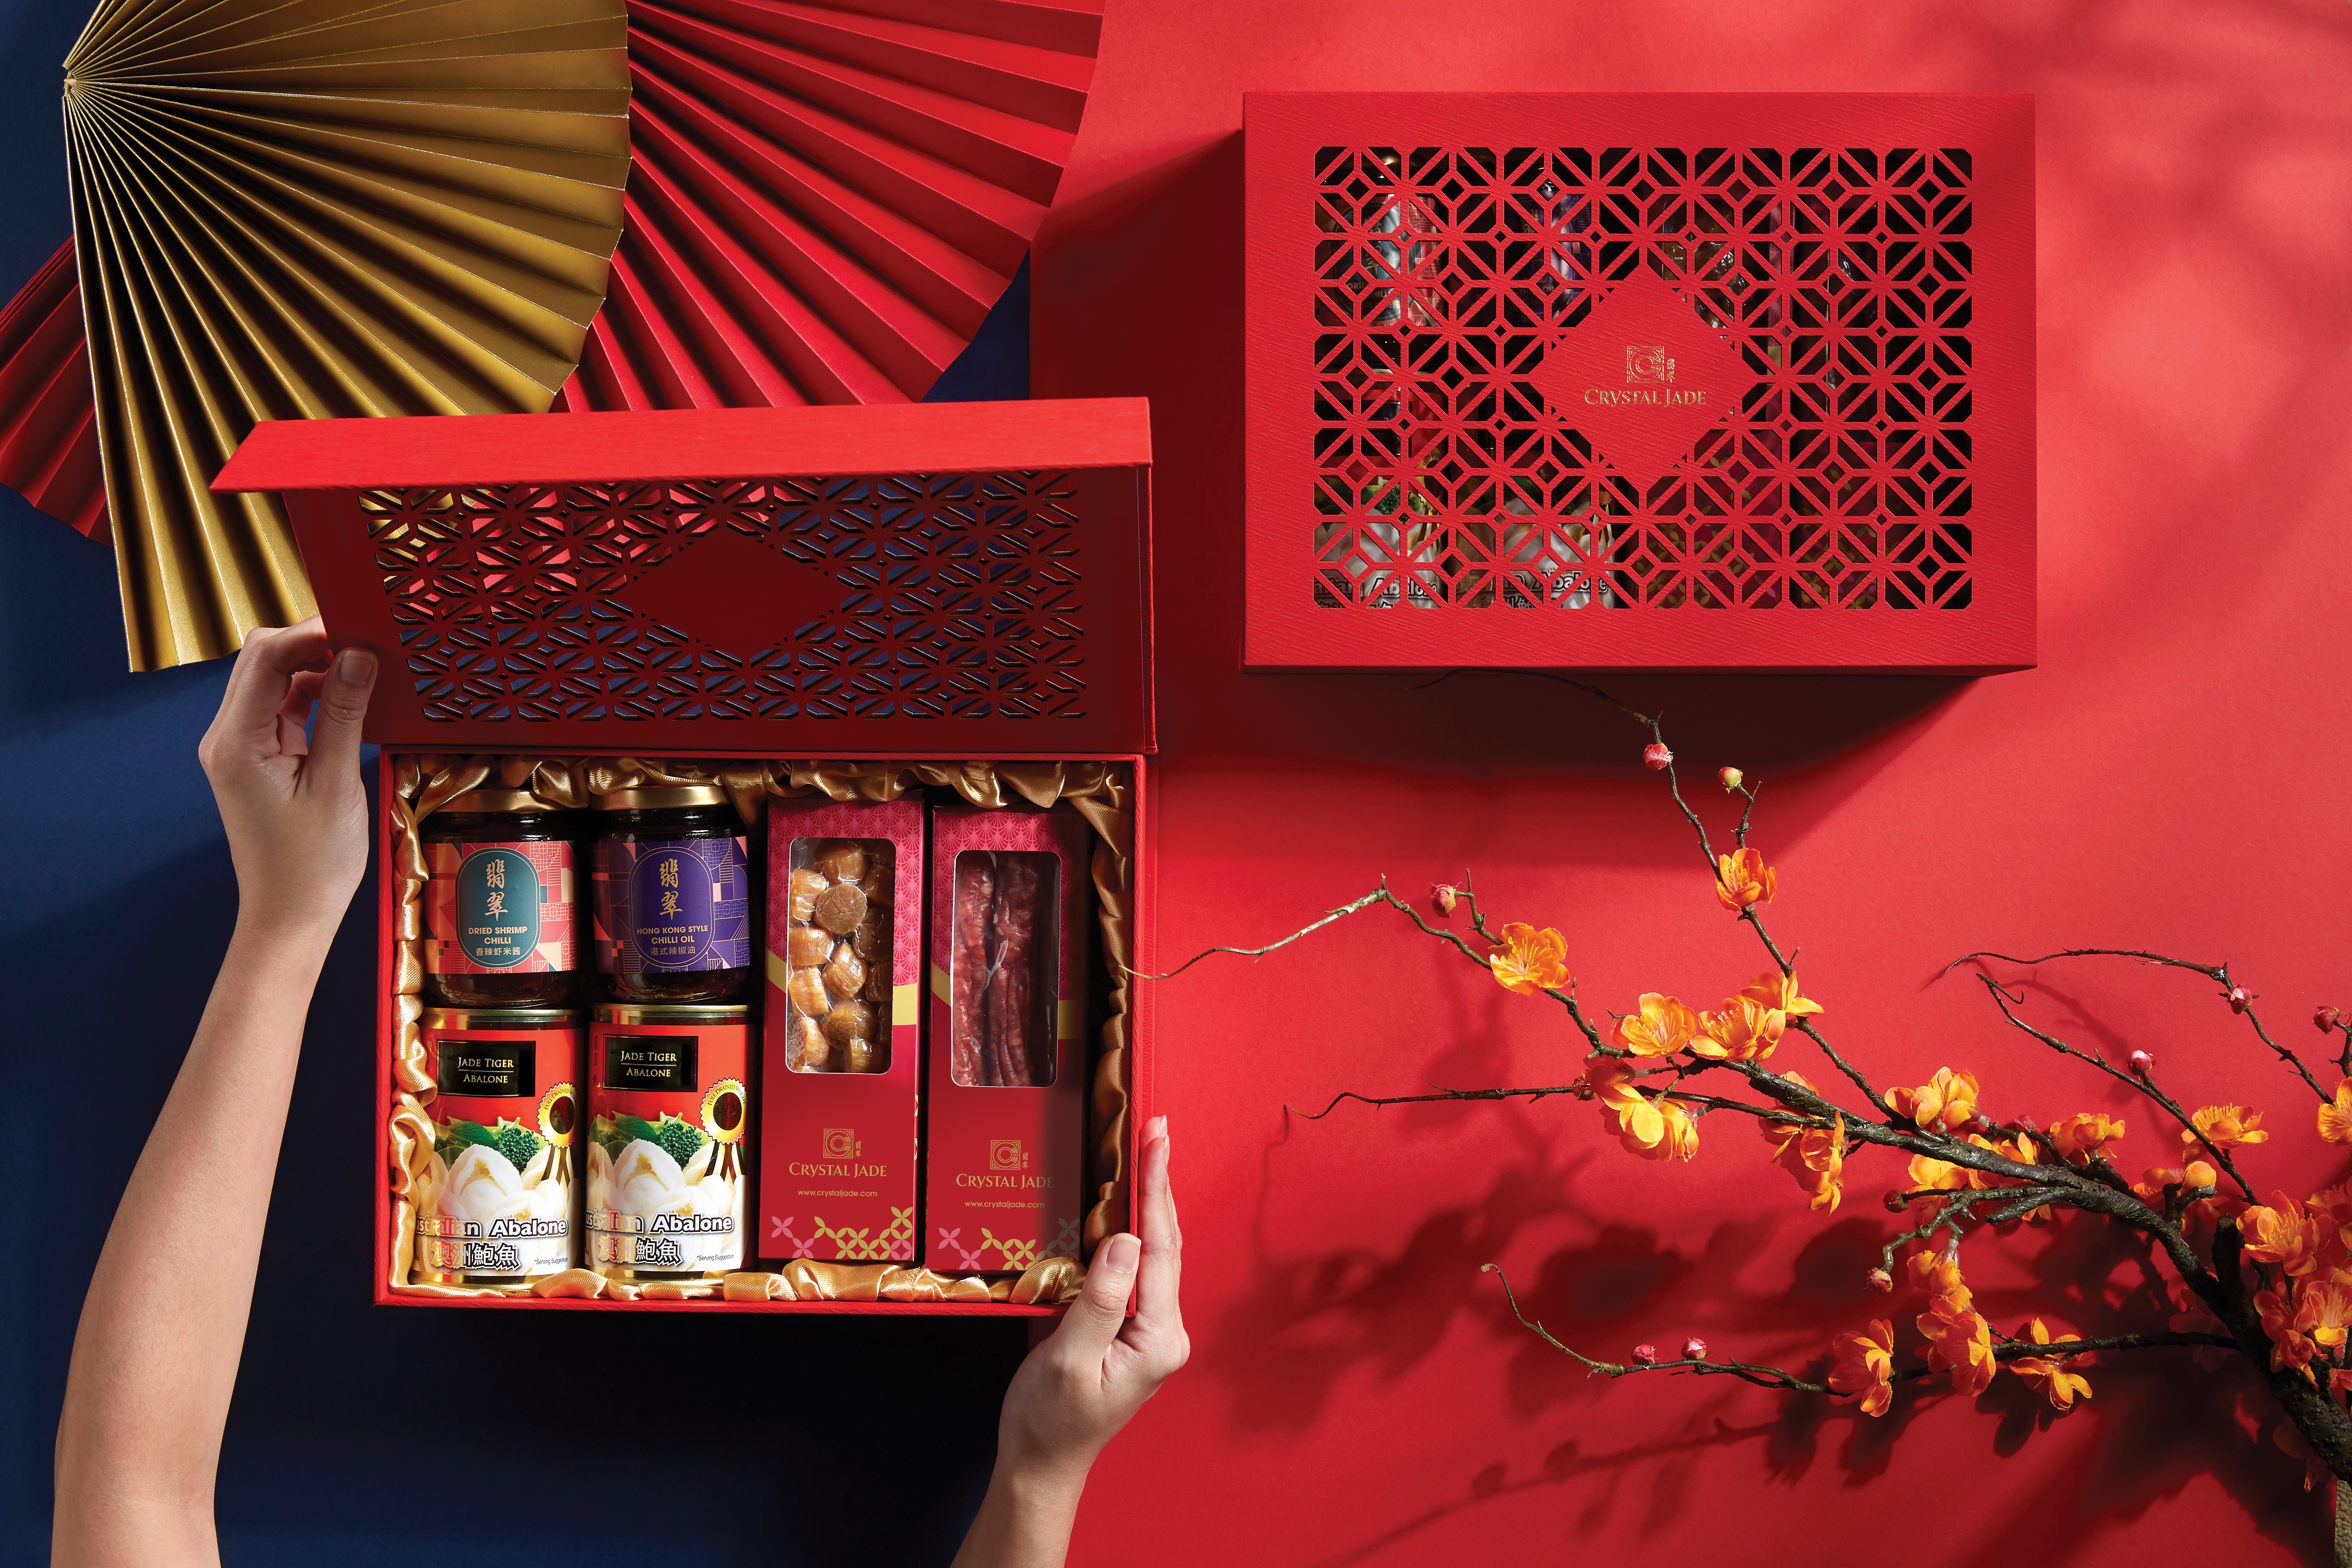 #6: For those who love to wish good fortune in the form of hampers and gift sets 